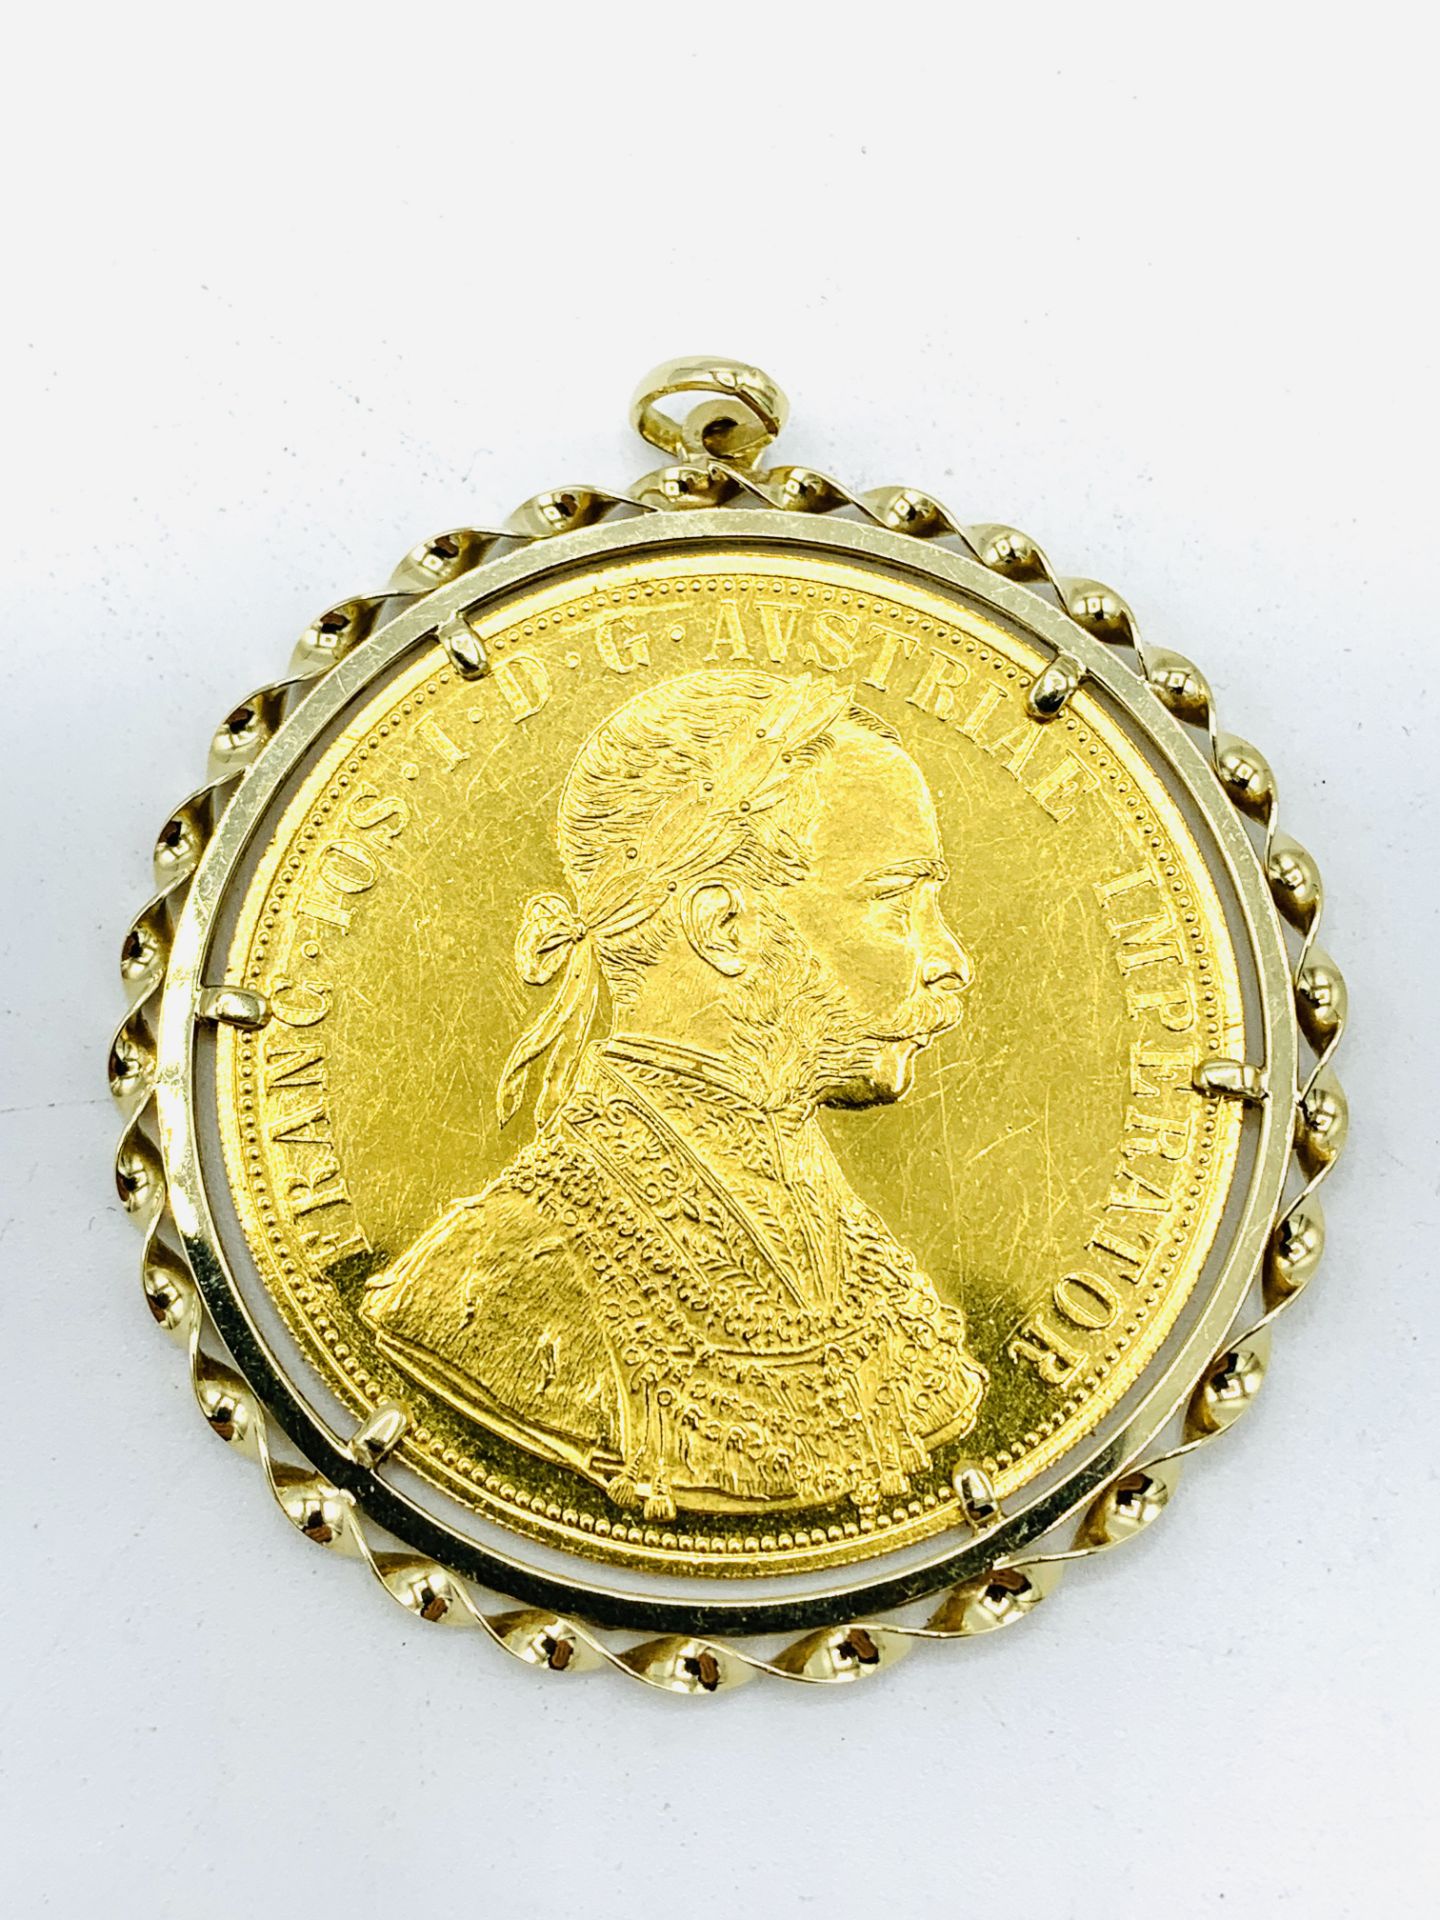 4 ducat coin in 14ct gold pendant frame - Image 3 of 3